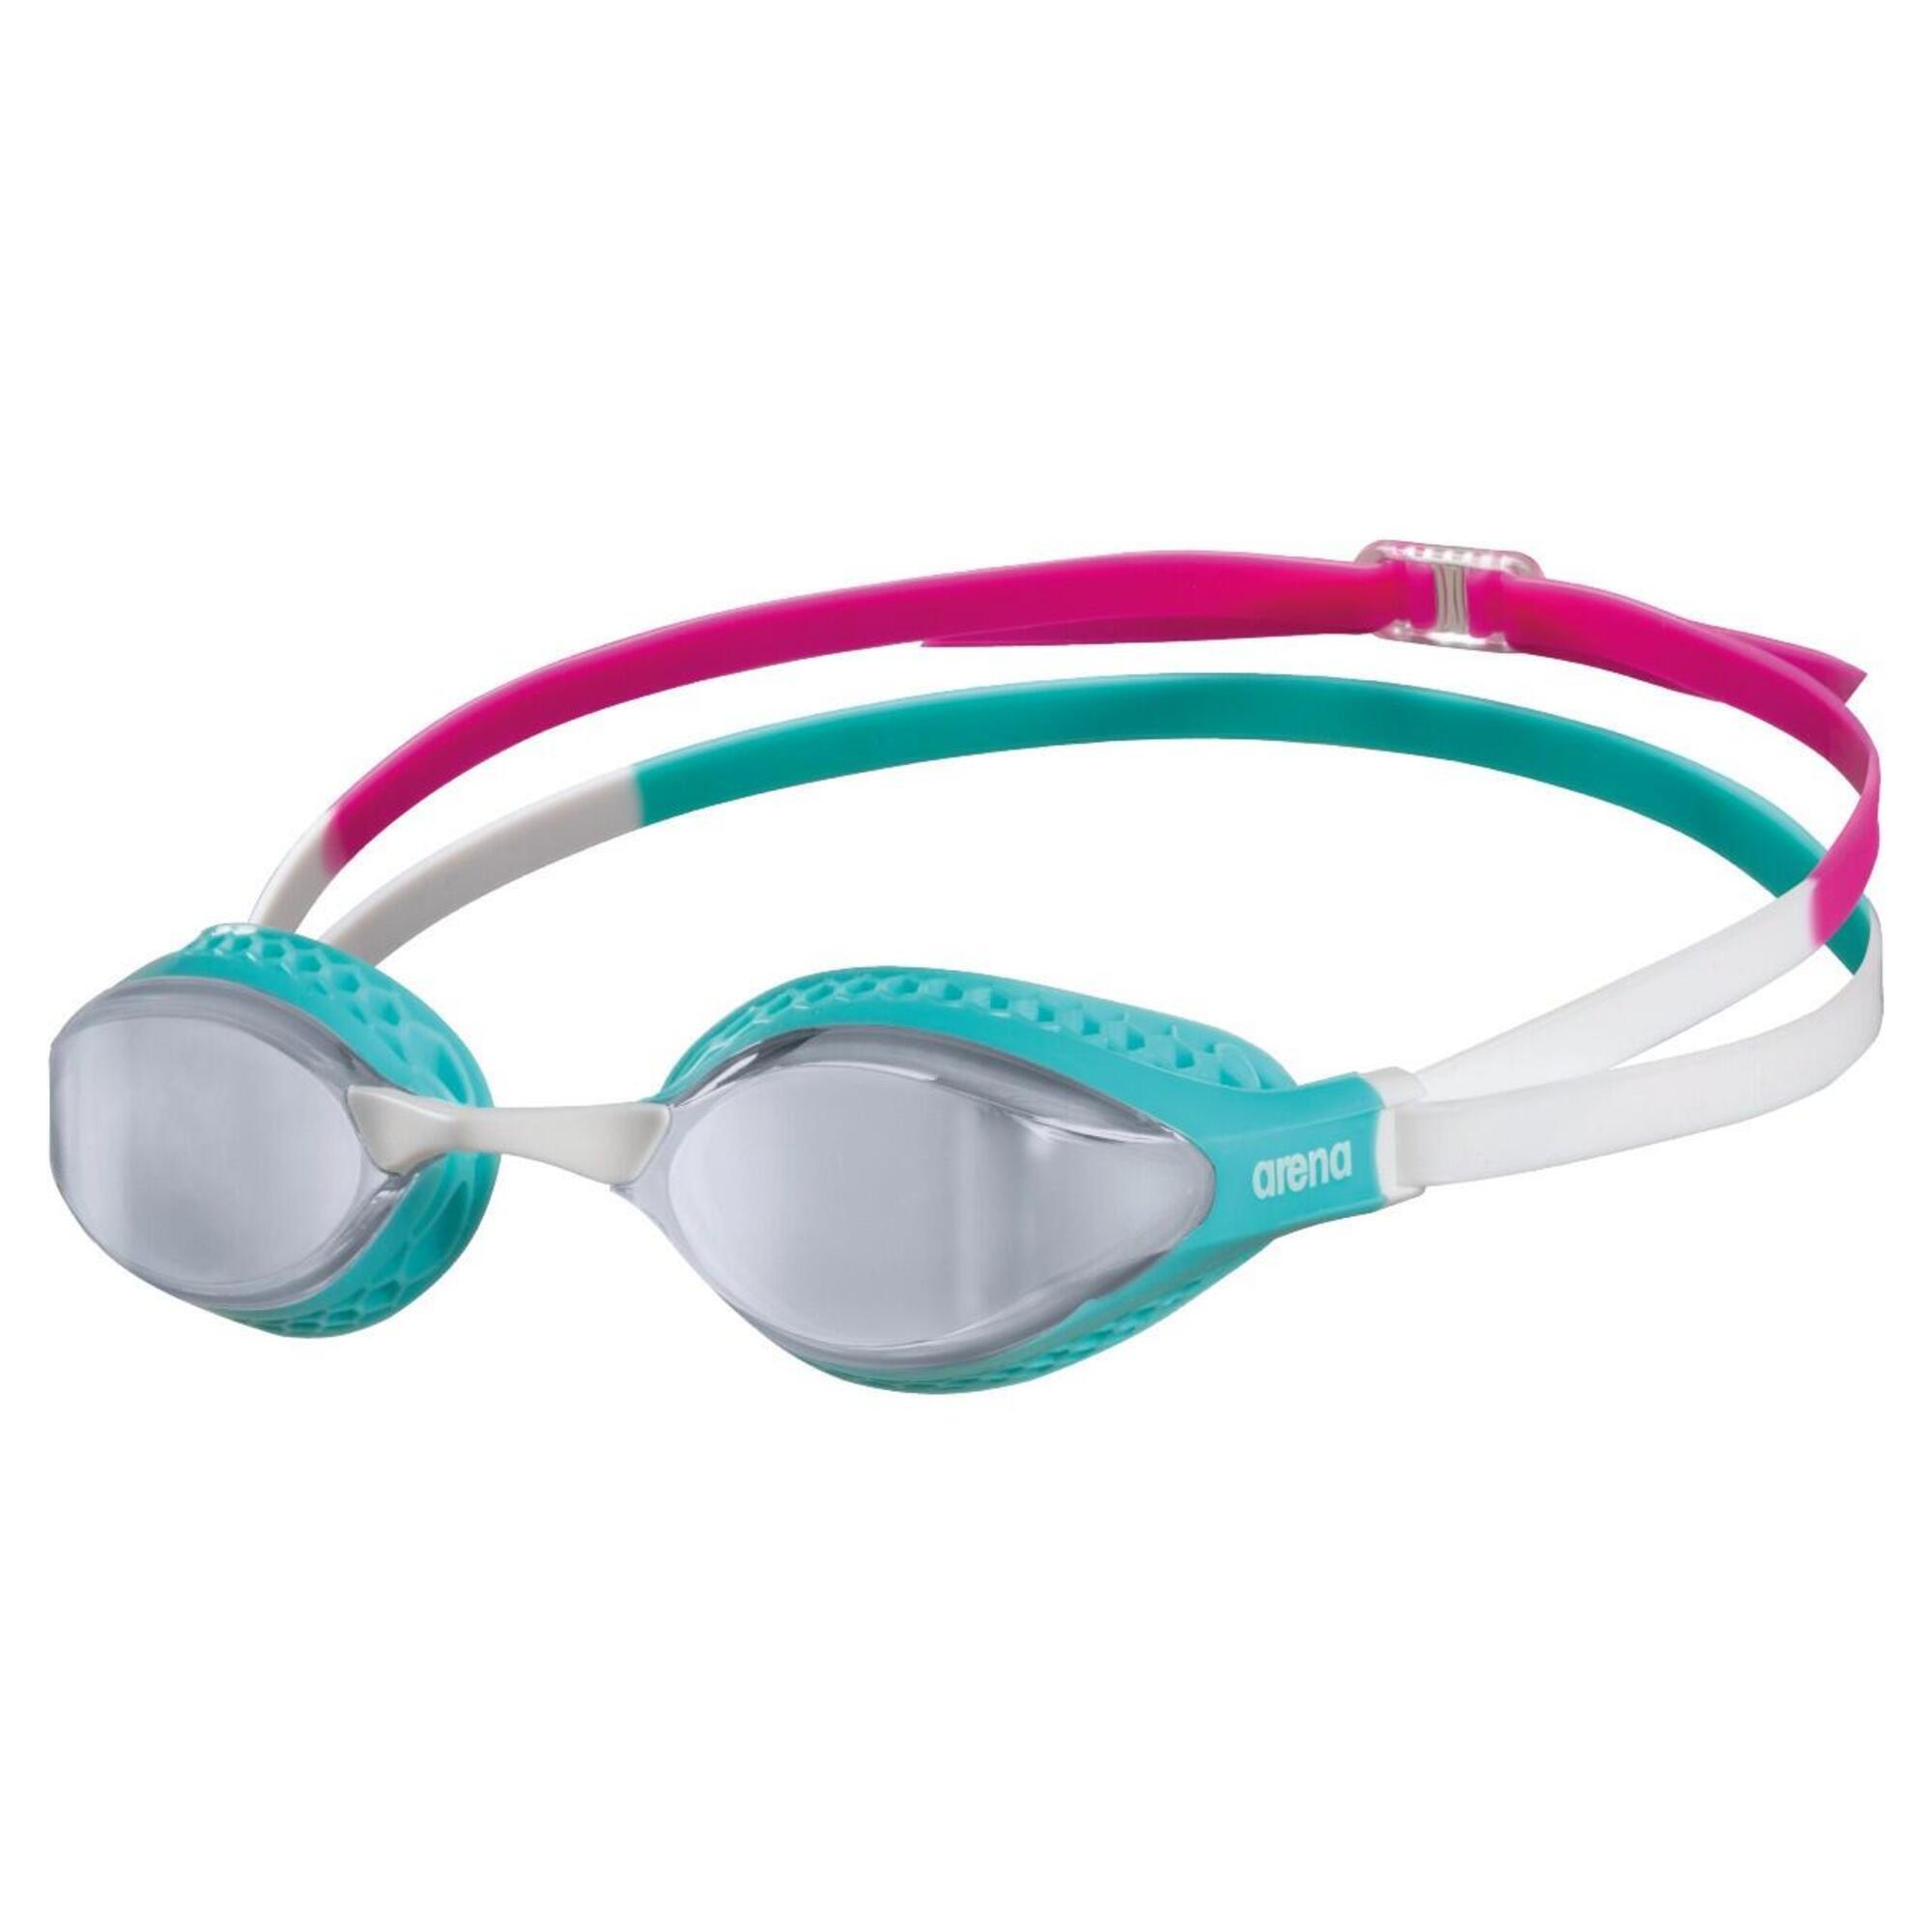 ARENA Arena Airspeed Mirrored Goggles - Silver/ Turquoise